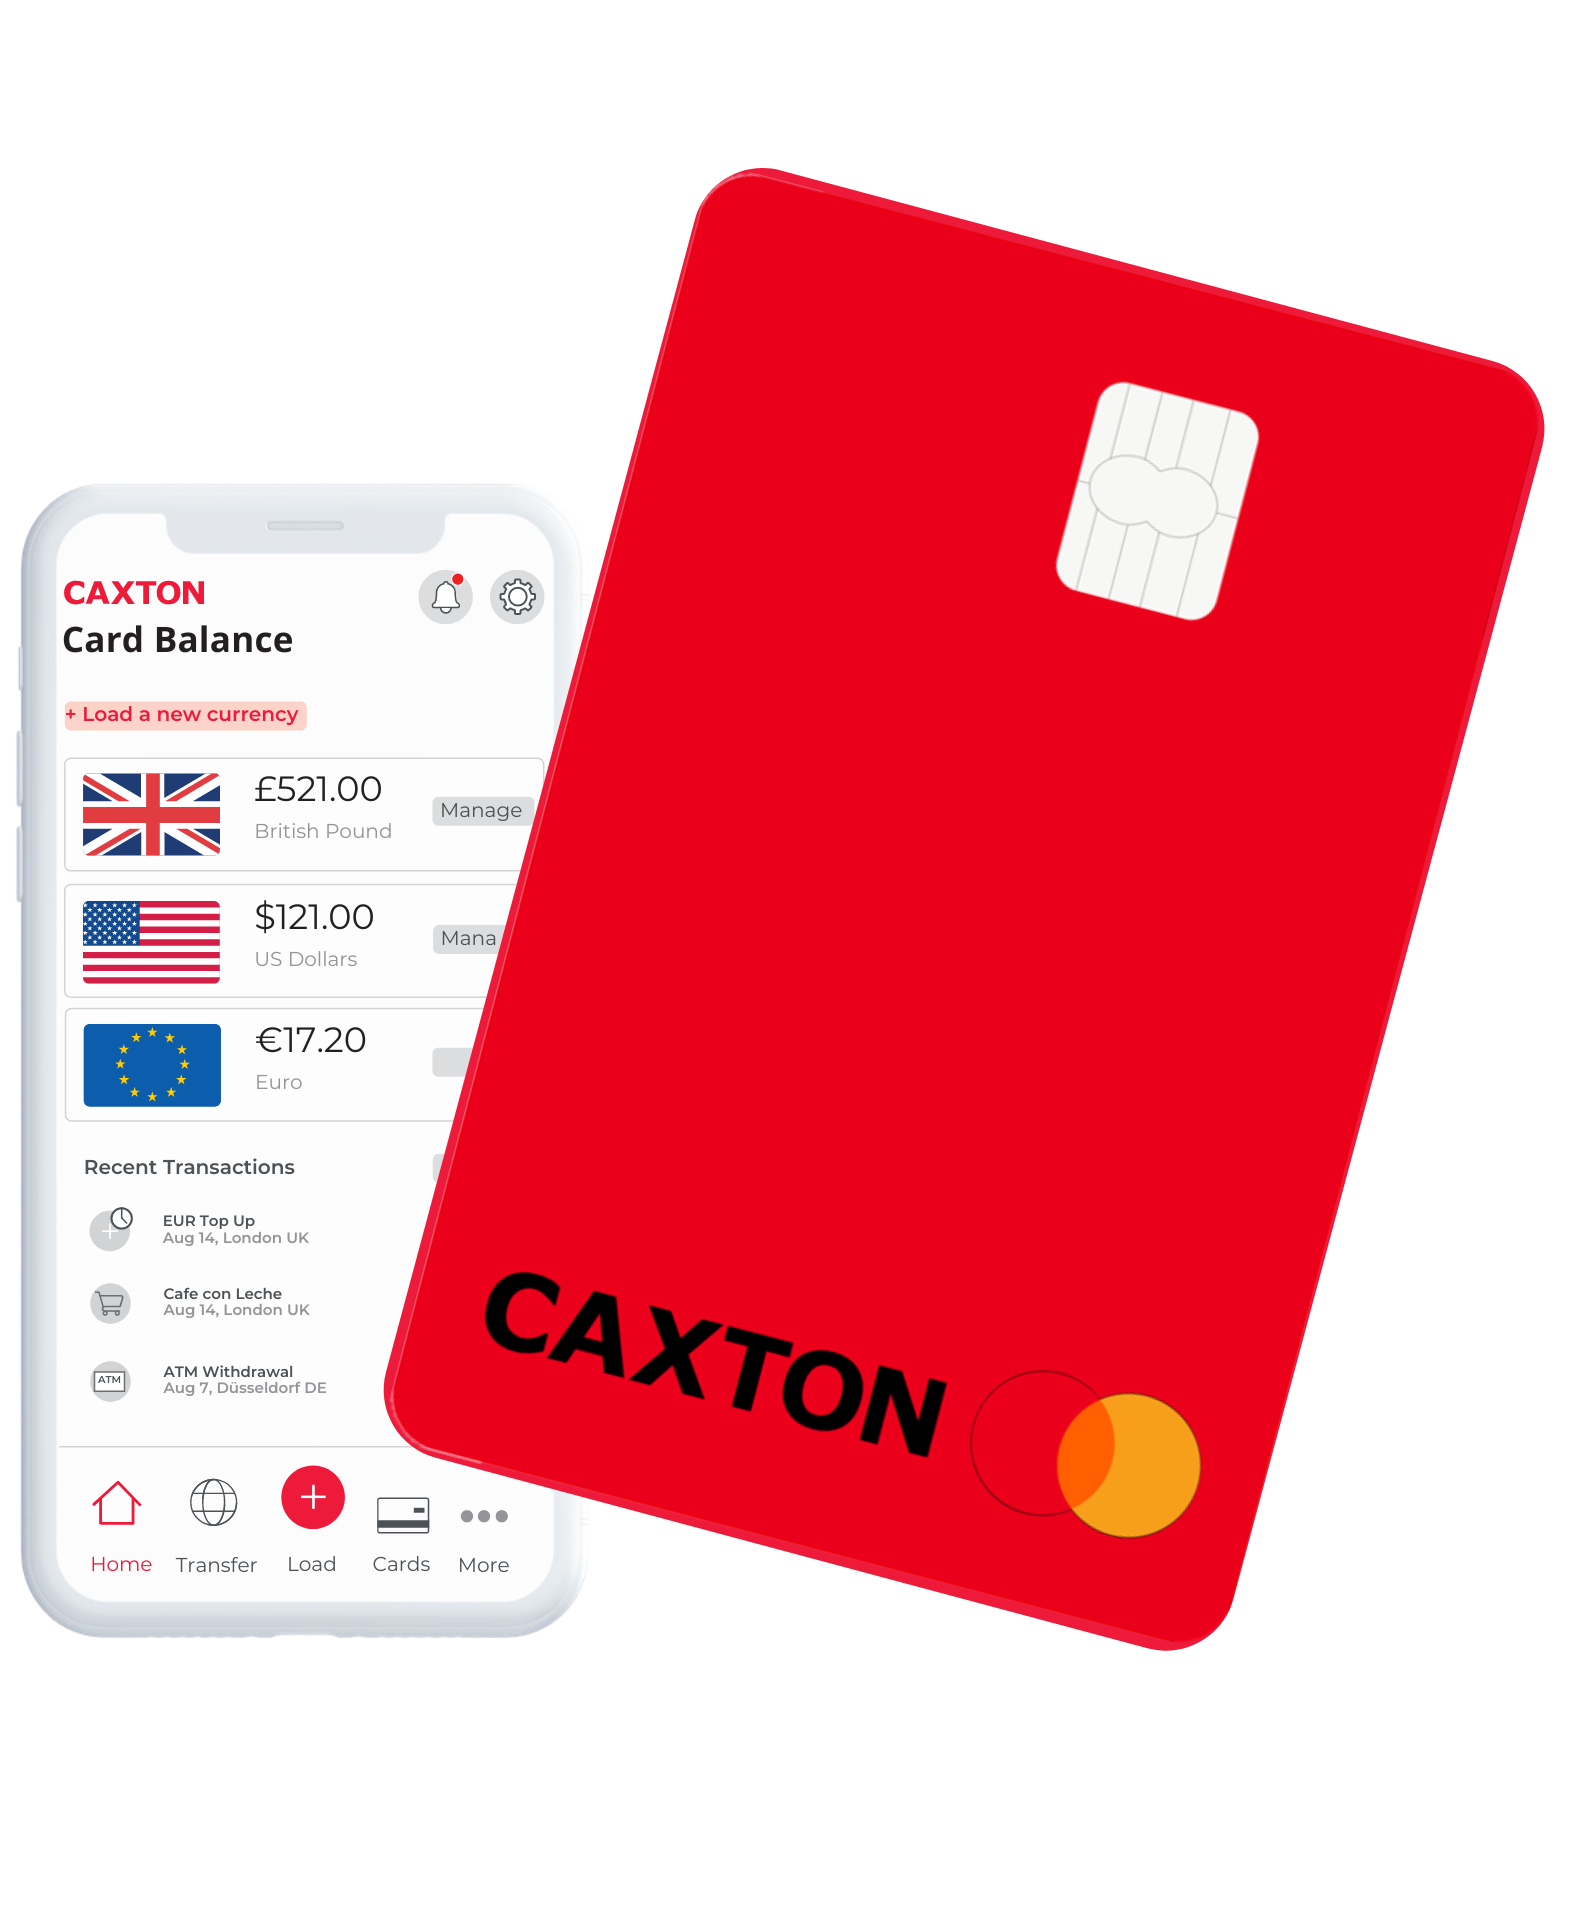 caxton red card and caxton app on phone